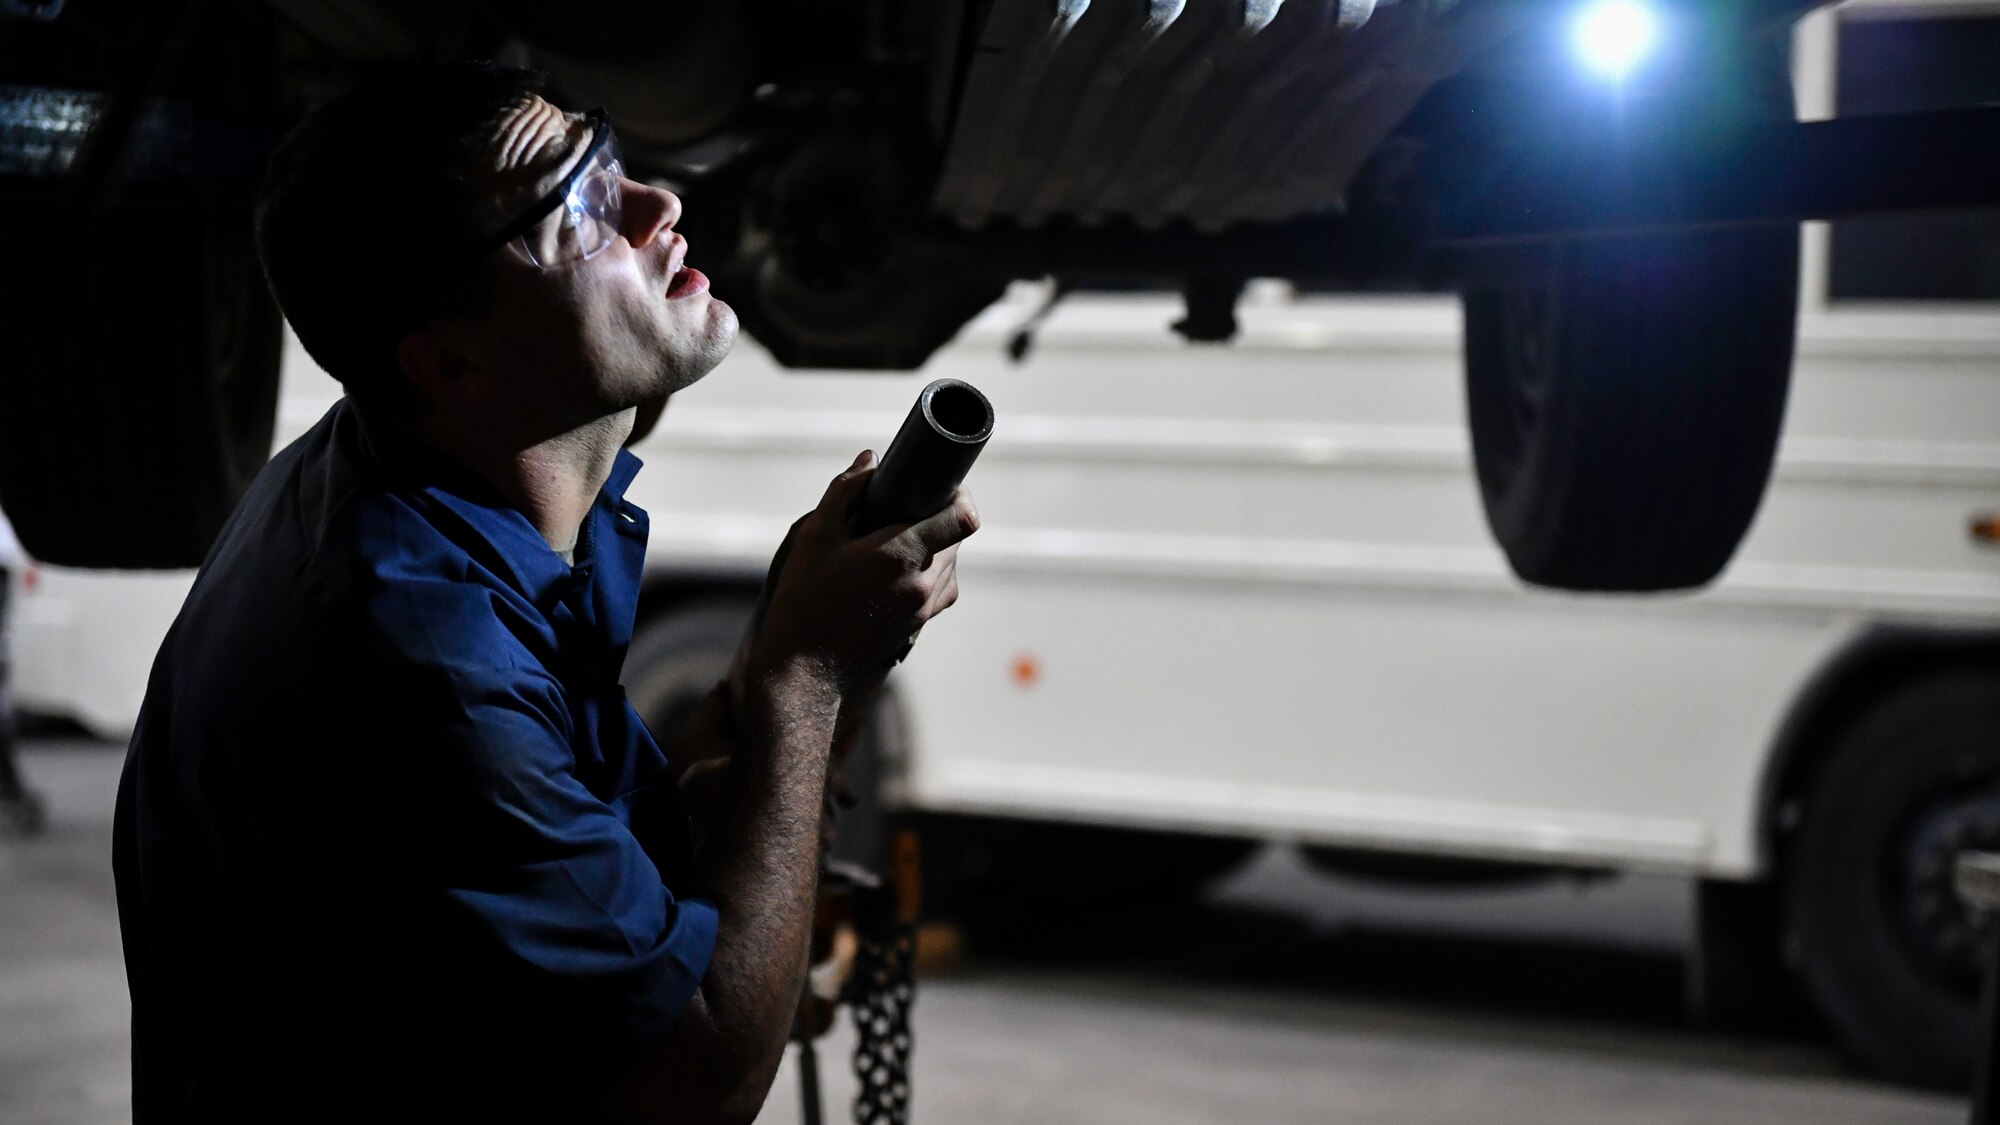 U.S. Air Force Senior Airman Darian O’Banion, 386th Expeditionary Logistics Readiness Squadron vehicle and equipment maintenance journeyman, prepares to install a driveshaft on a vehicle at Ali Al Salem Air Base, Kuwait, July 29, 2019. The driveshaft is a rotating part which transmits torque in an engine to the wheels of the vehicle. (U.S. Air Force photo by Staff Sgt. Mozer O. Da Cunha)